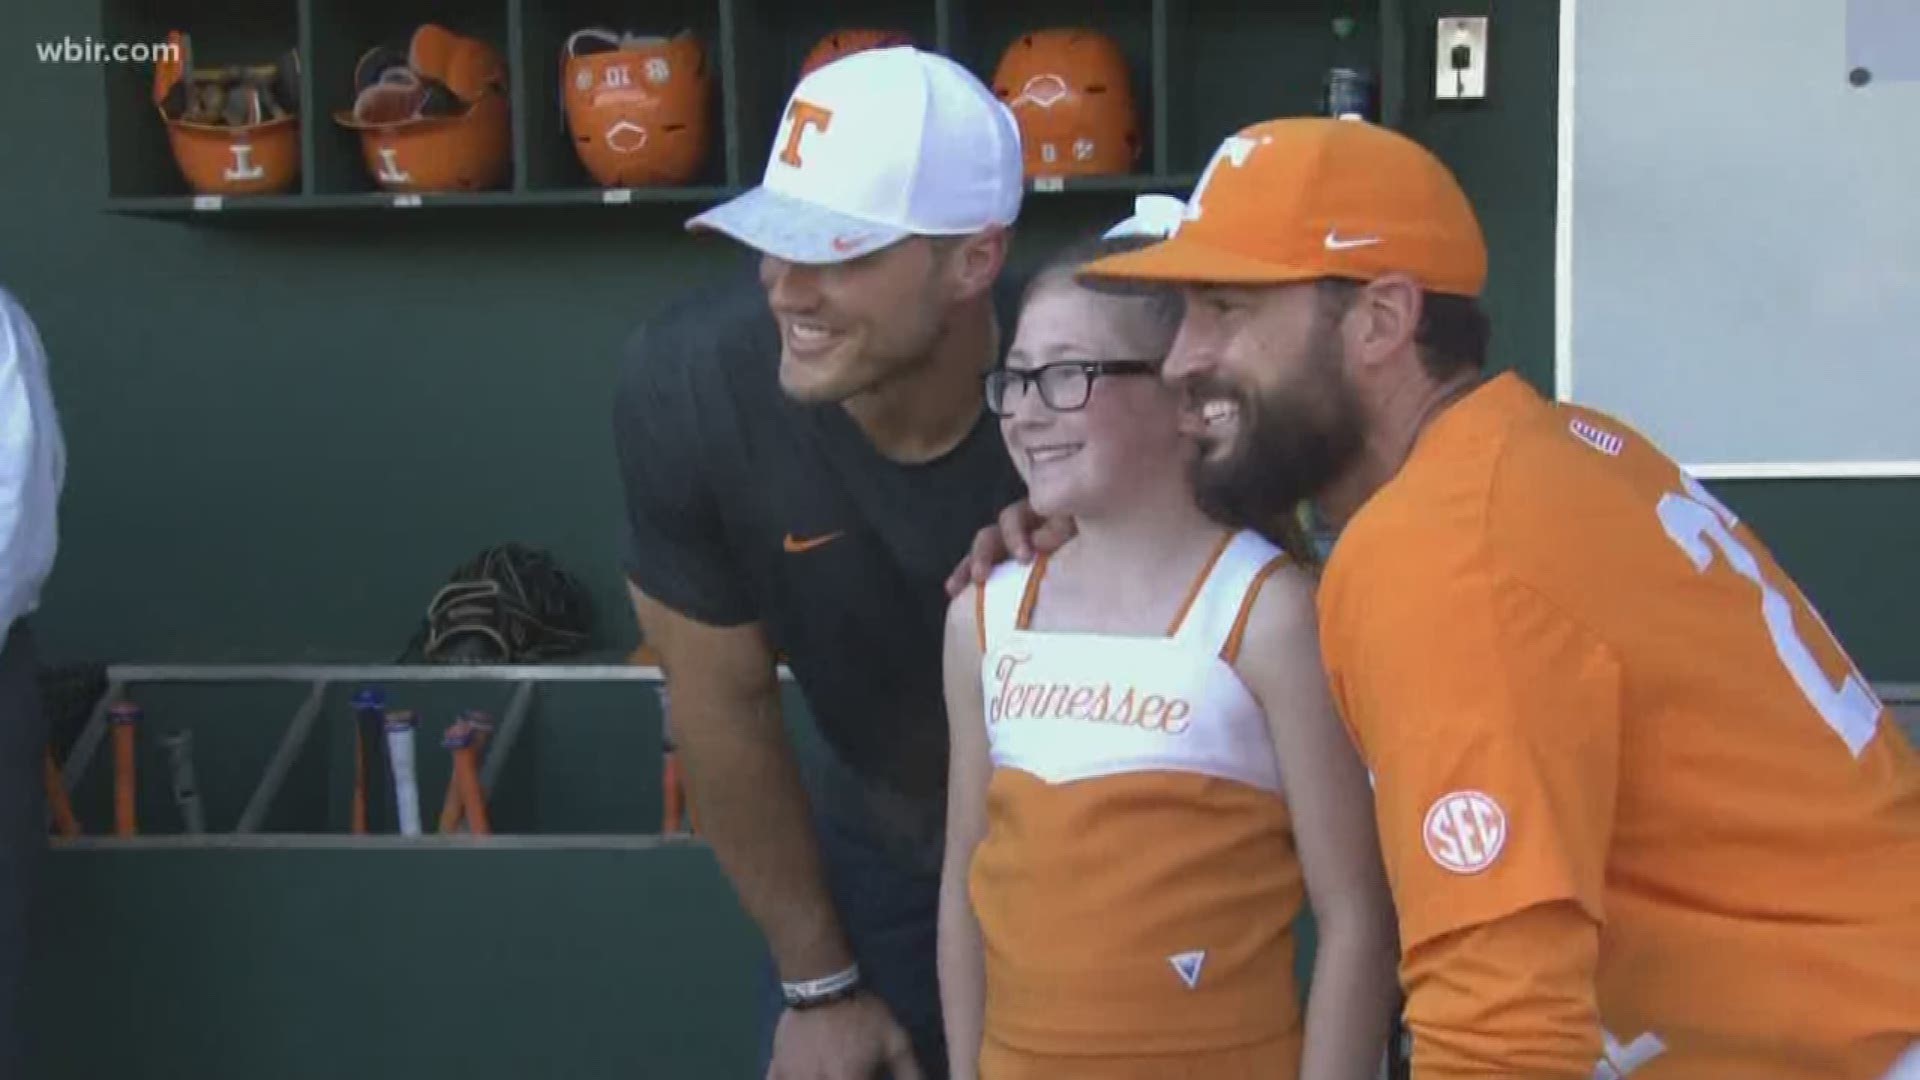 A young cheerleader living with cystic fibrosis had one of her dreams come true today. She suited up and cheered for the Vols at tonight's baseball game, and received a piece of life-saving equipment